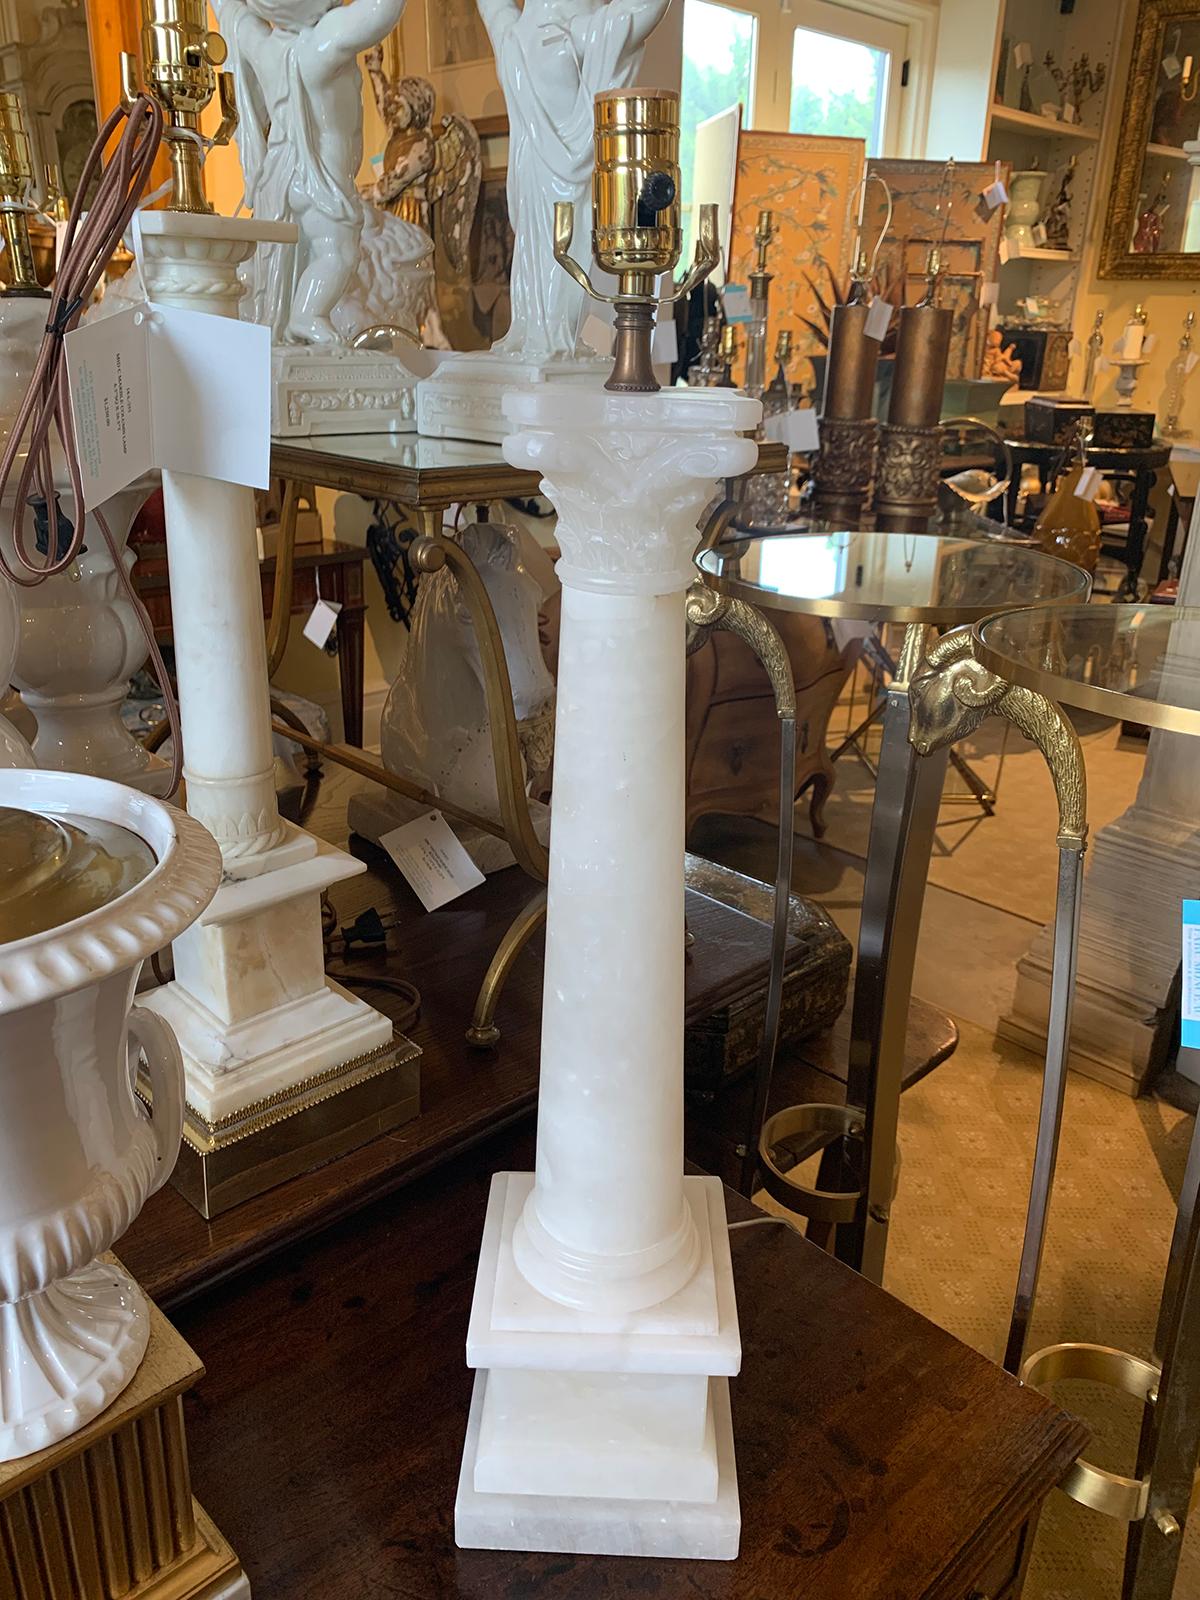 Early 20th century Alabaster column lamp
New wiring.